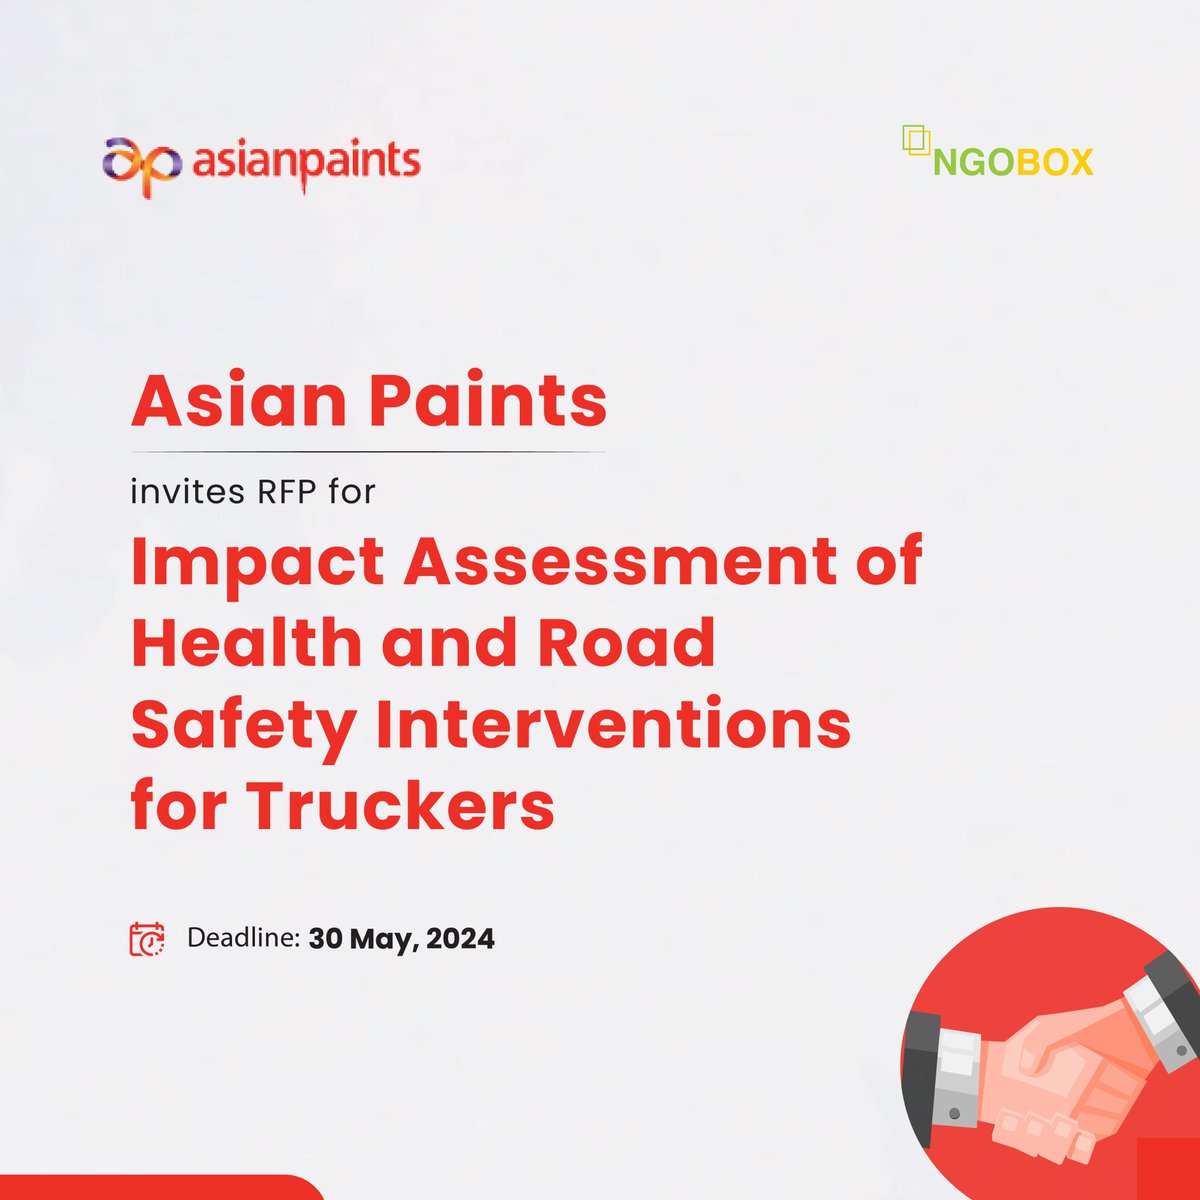 Request for Proposal: @asianpaints  invites RFP for Impact Assessment of Health and Road Safety Interventions for Truckers.
Deadline: May 30, 2024
Apply: ngobox.org/full_rfp_eoi_R…
#RequestforProposal #AsianPaints #ImpactAssessment #HealthAndSafety #Truckers #ApplyNow